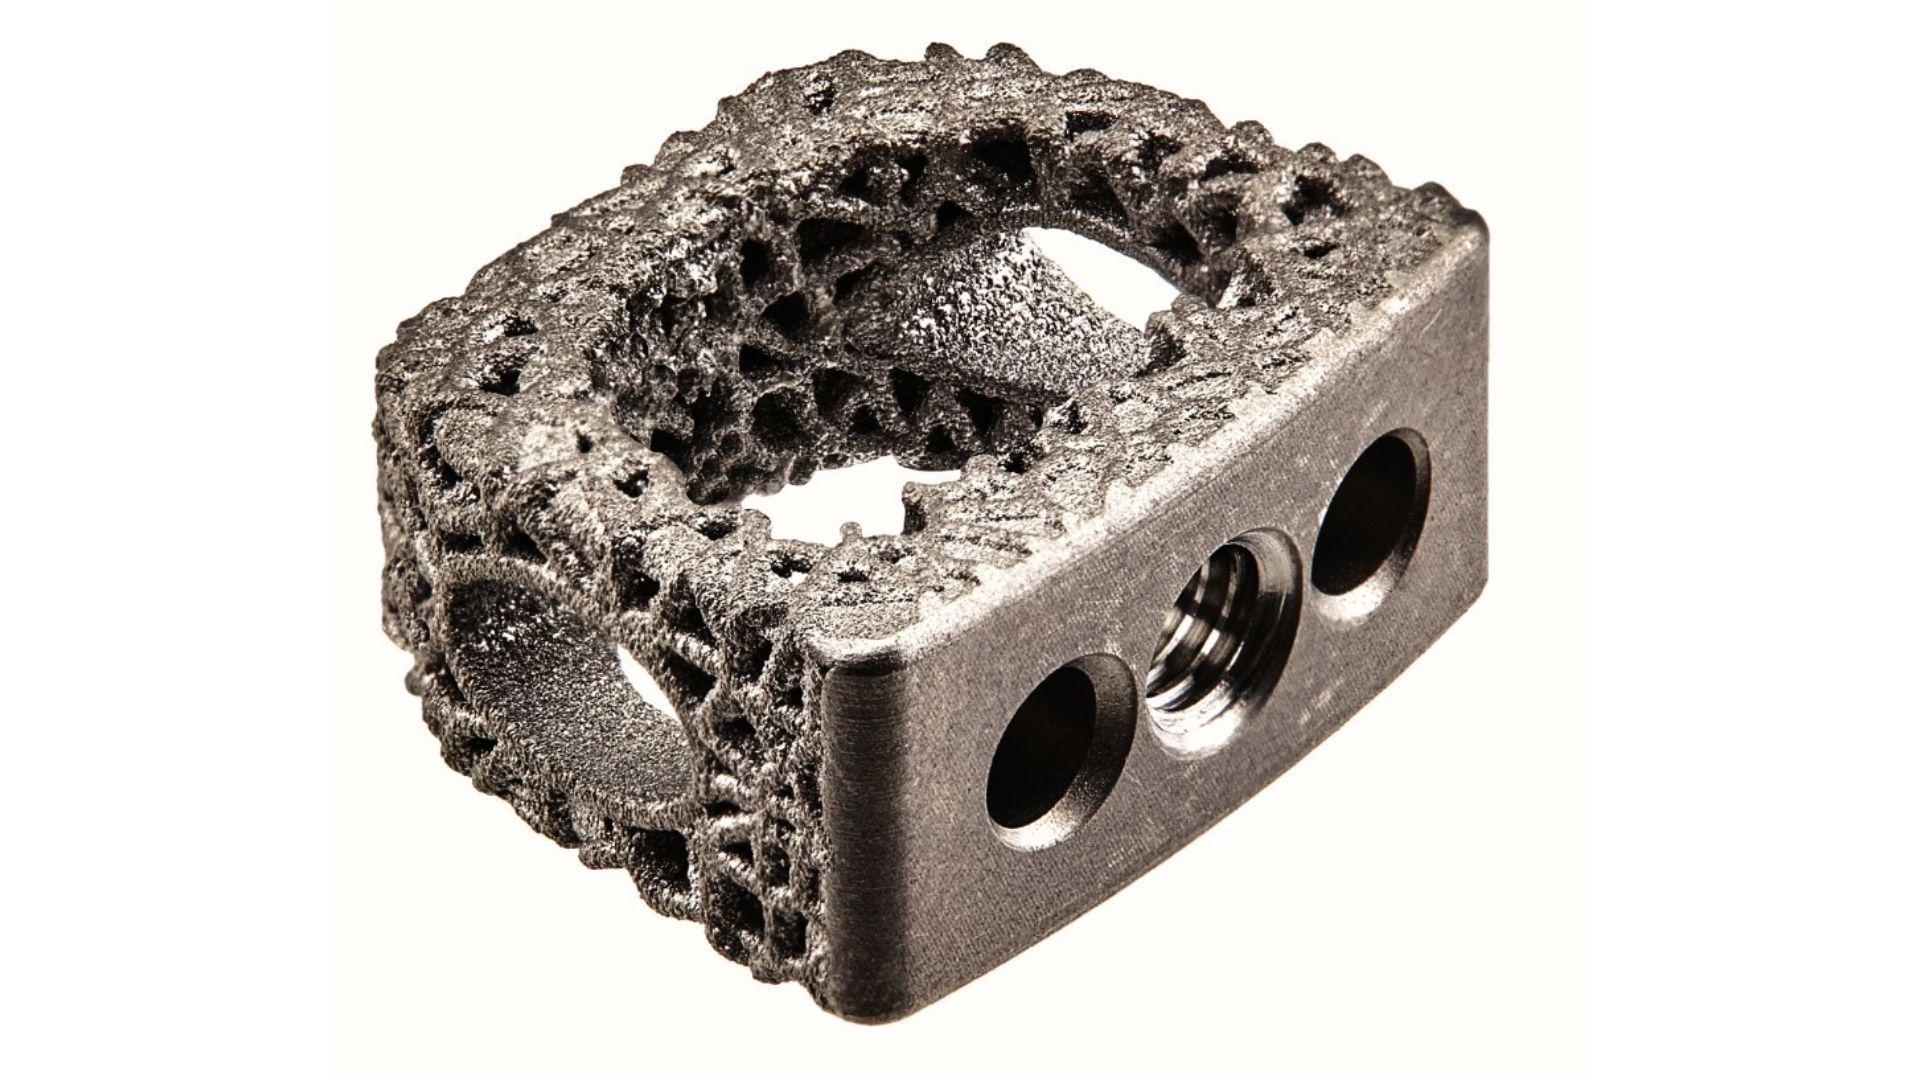 ulrich medical USA, Inc. announced the FDA has given 510(k) clearance of its Flux-C 3D printed porous titanium cervical interbody device